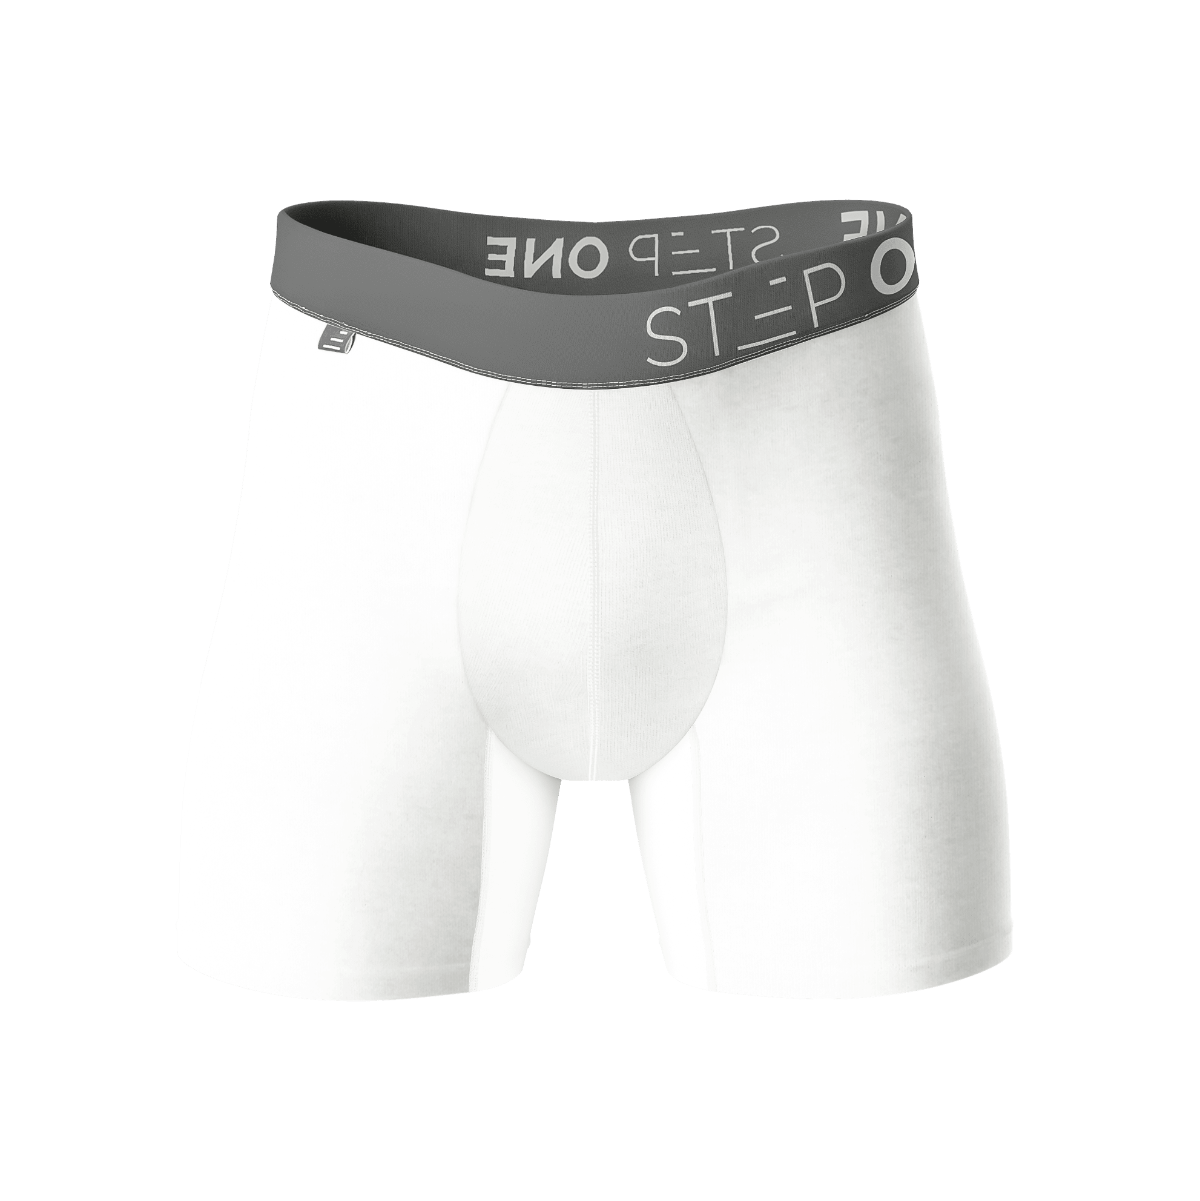 SLSA has partnered with @stepone.life to make a very special edition -  lifesaving underwear to help raise funds for Surf Life Saving! $5…